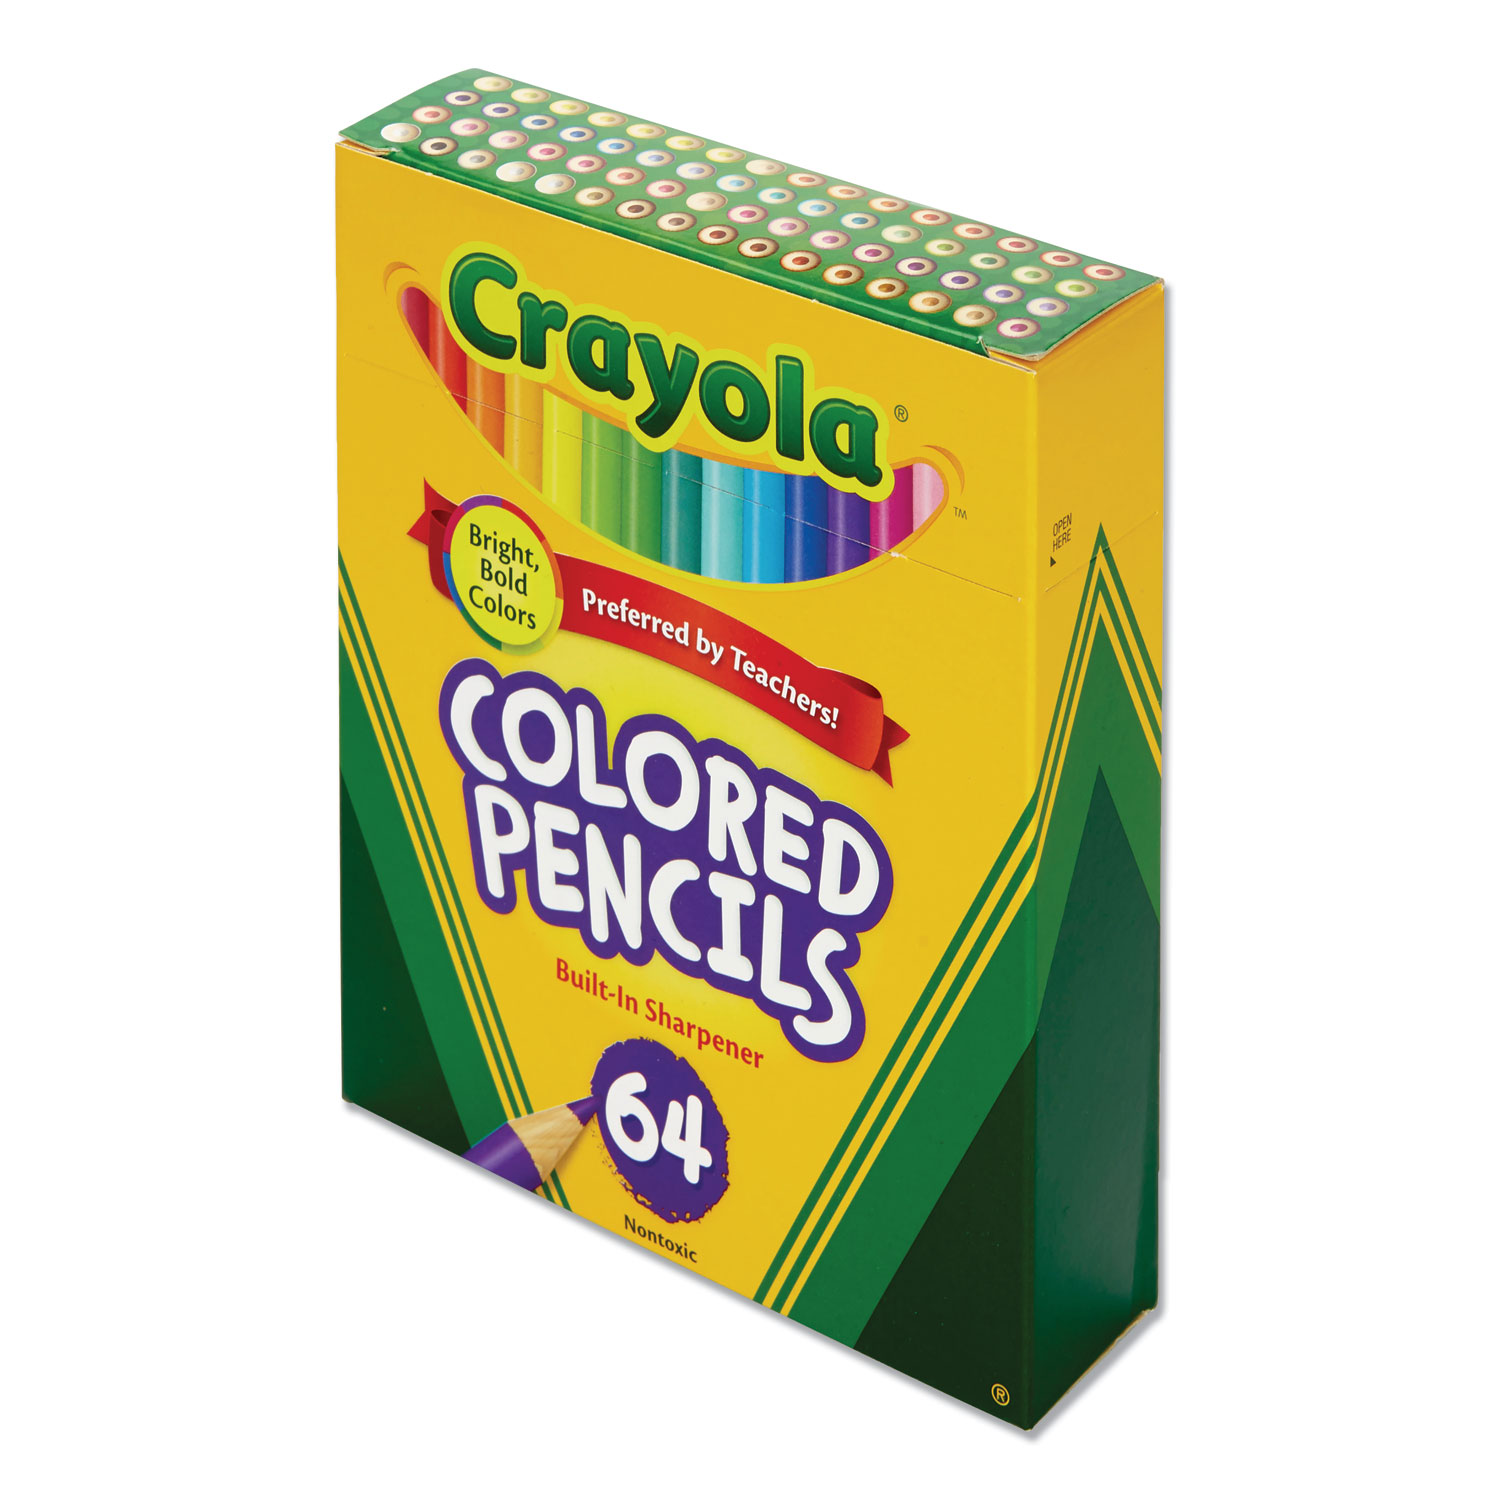 Crayola Colored Woodcase Pencil HB 3.3 Mm Assorted 64/pack Cyo683364 683364 for sale online 